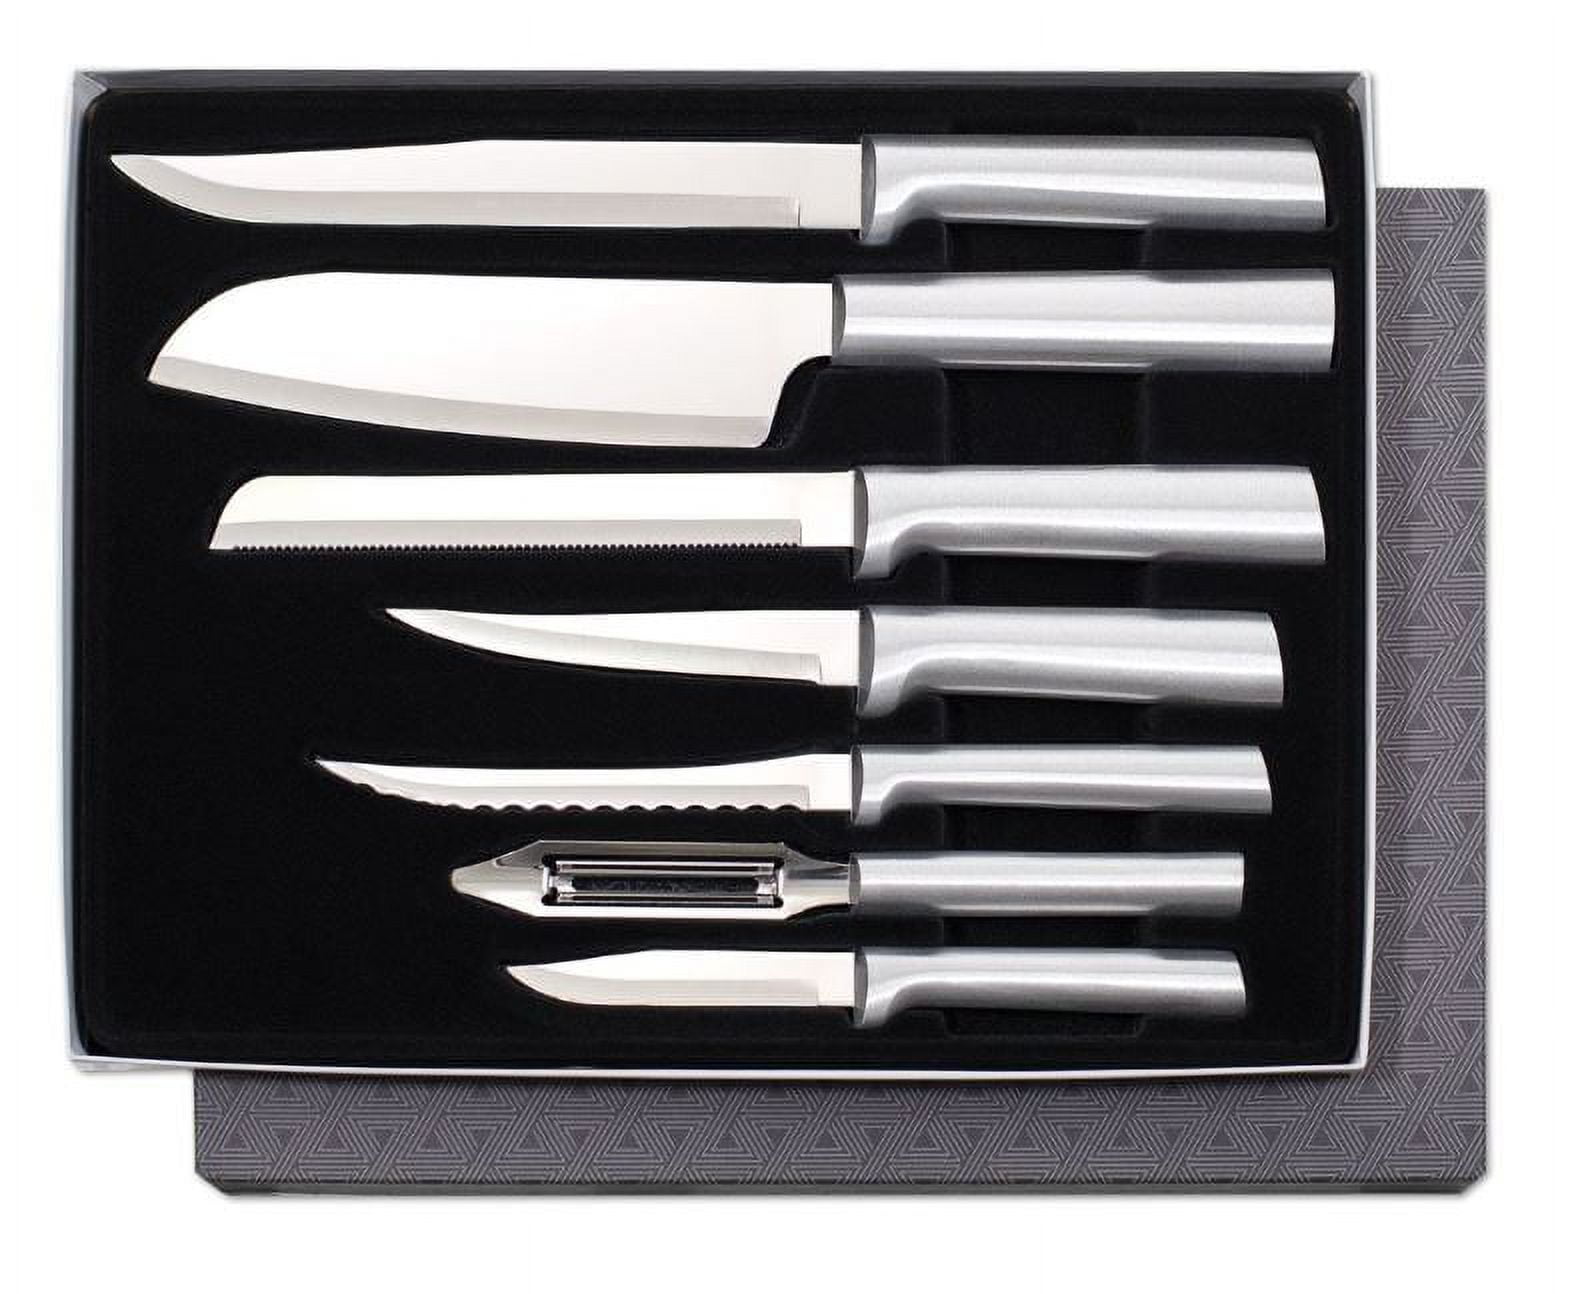 Rada Cutlery Chef Select 3-Piece Large Knife Set – Stainless Steel